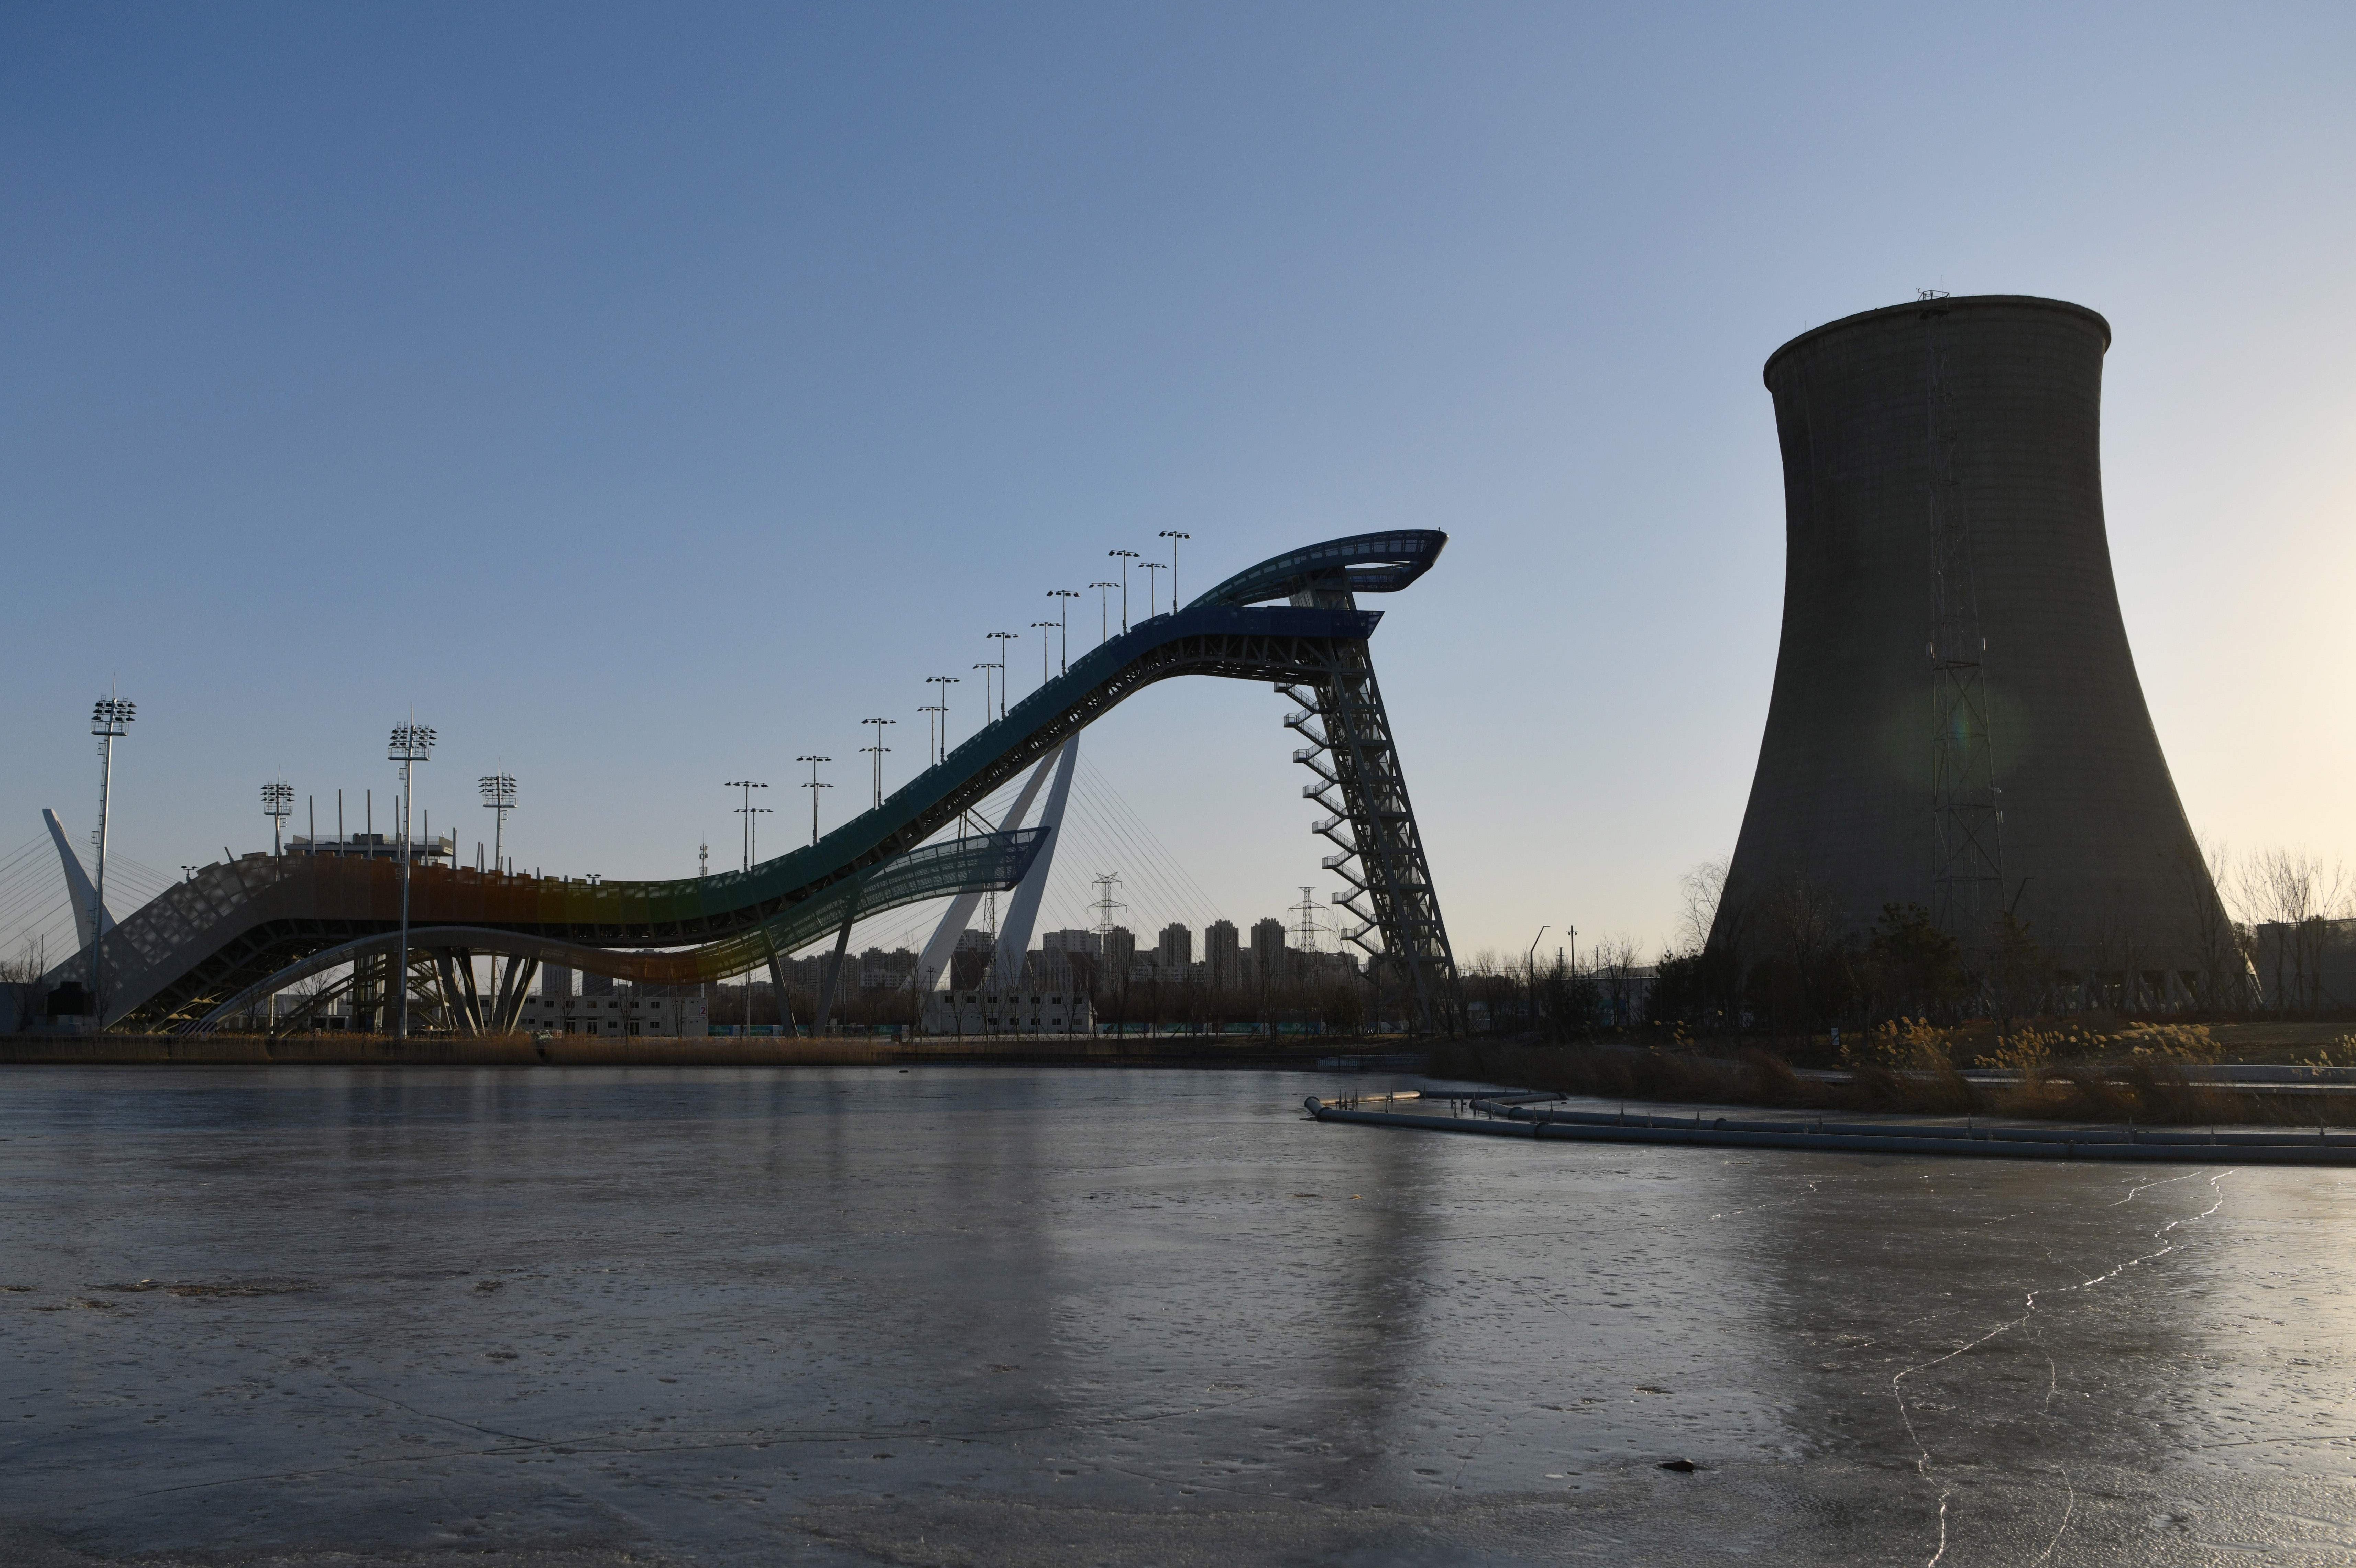 The Shougang Big Air venue at the 2022 Winter Olympics in Beijing. While some people think there's a nuclear power plant in the area, it's actually a defunct steel factory.